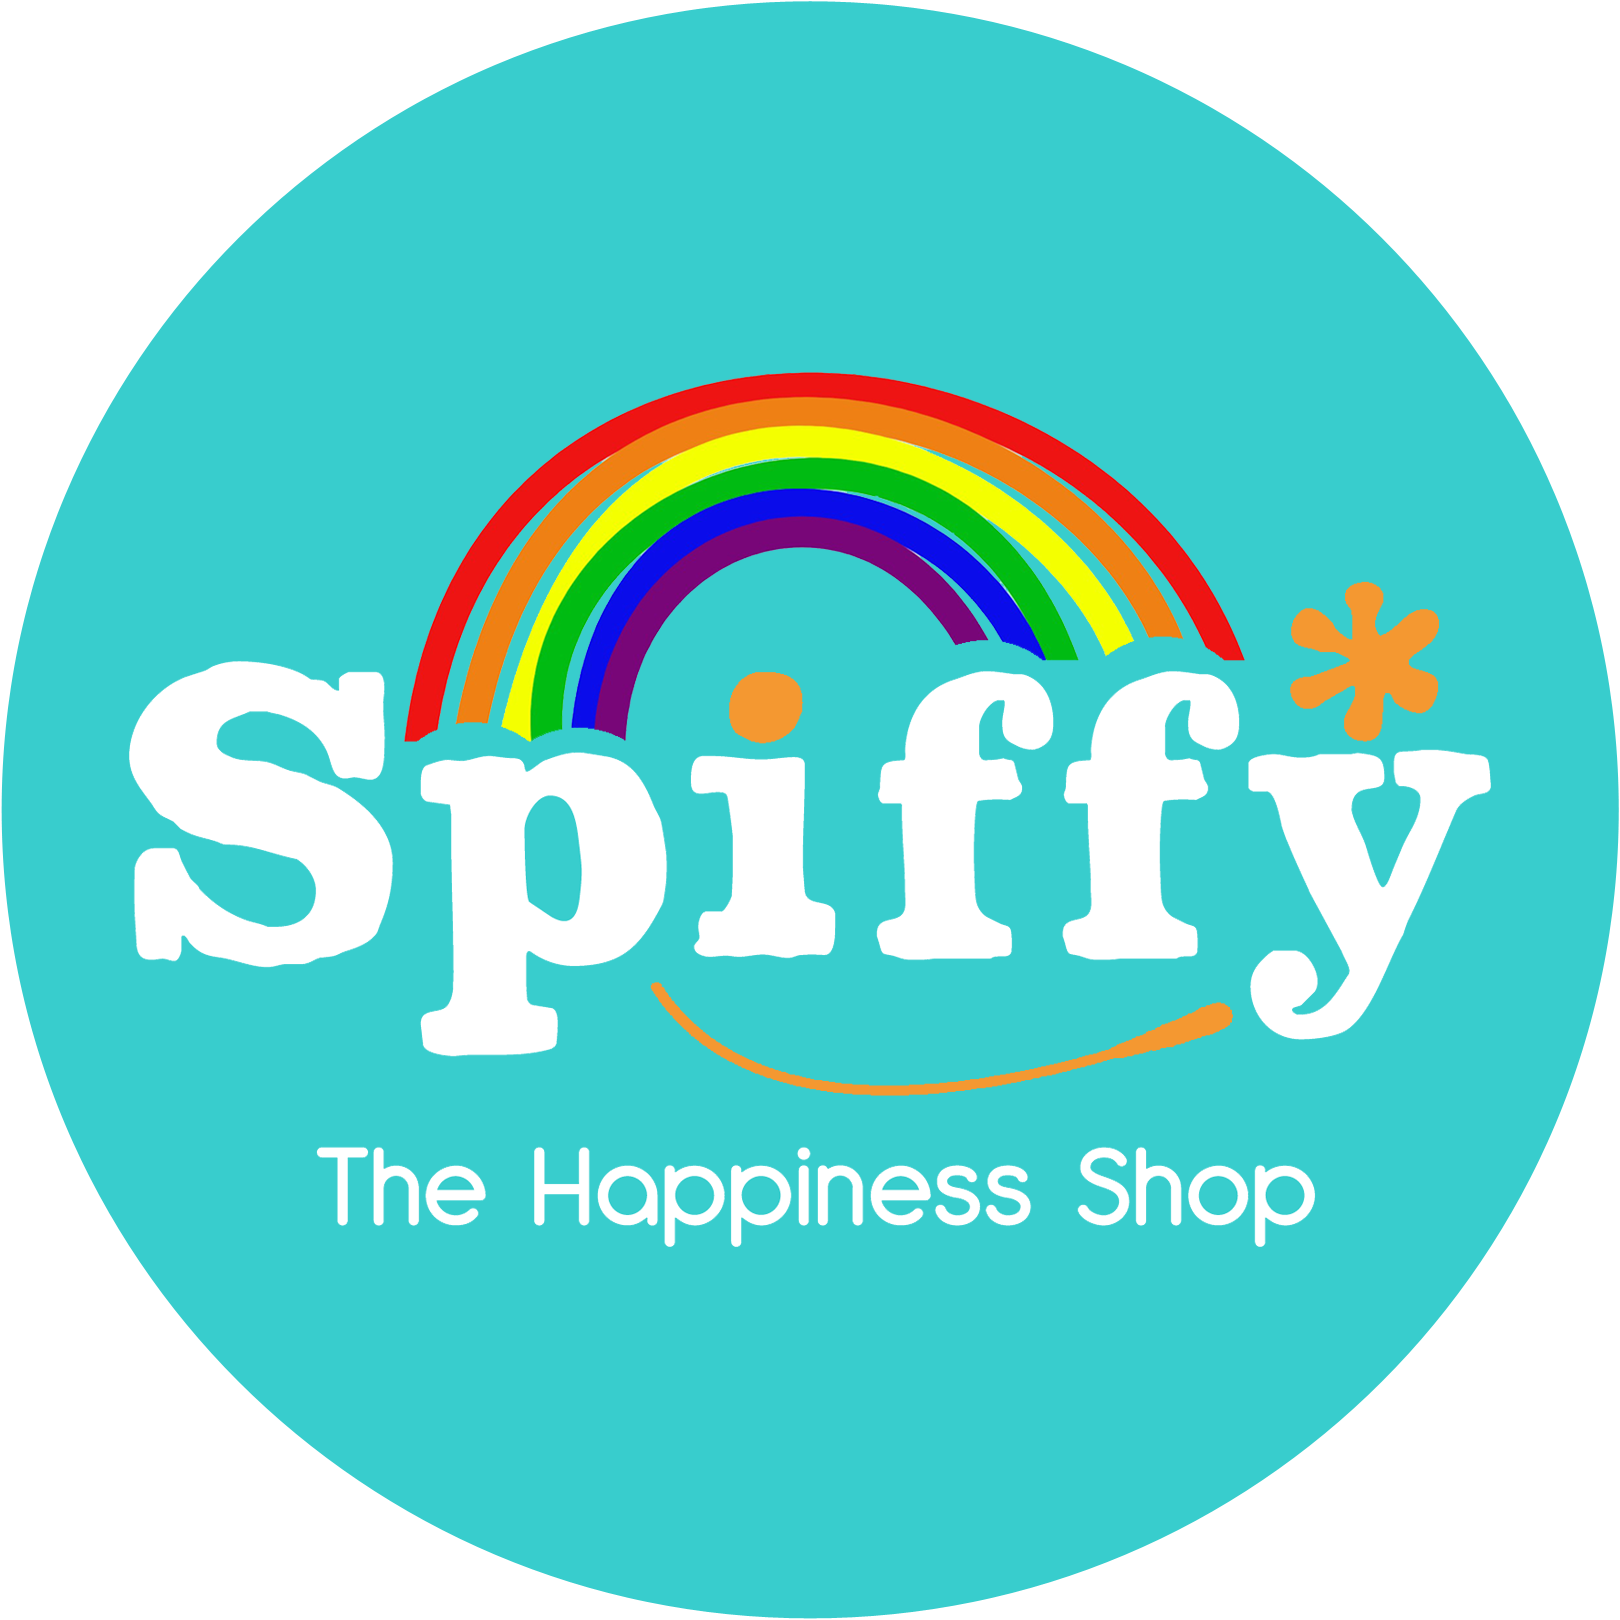 Spiffy - The Happiness Shop Feel Good Treats for Better Mental Health